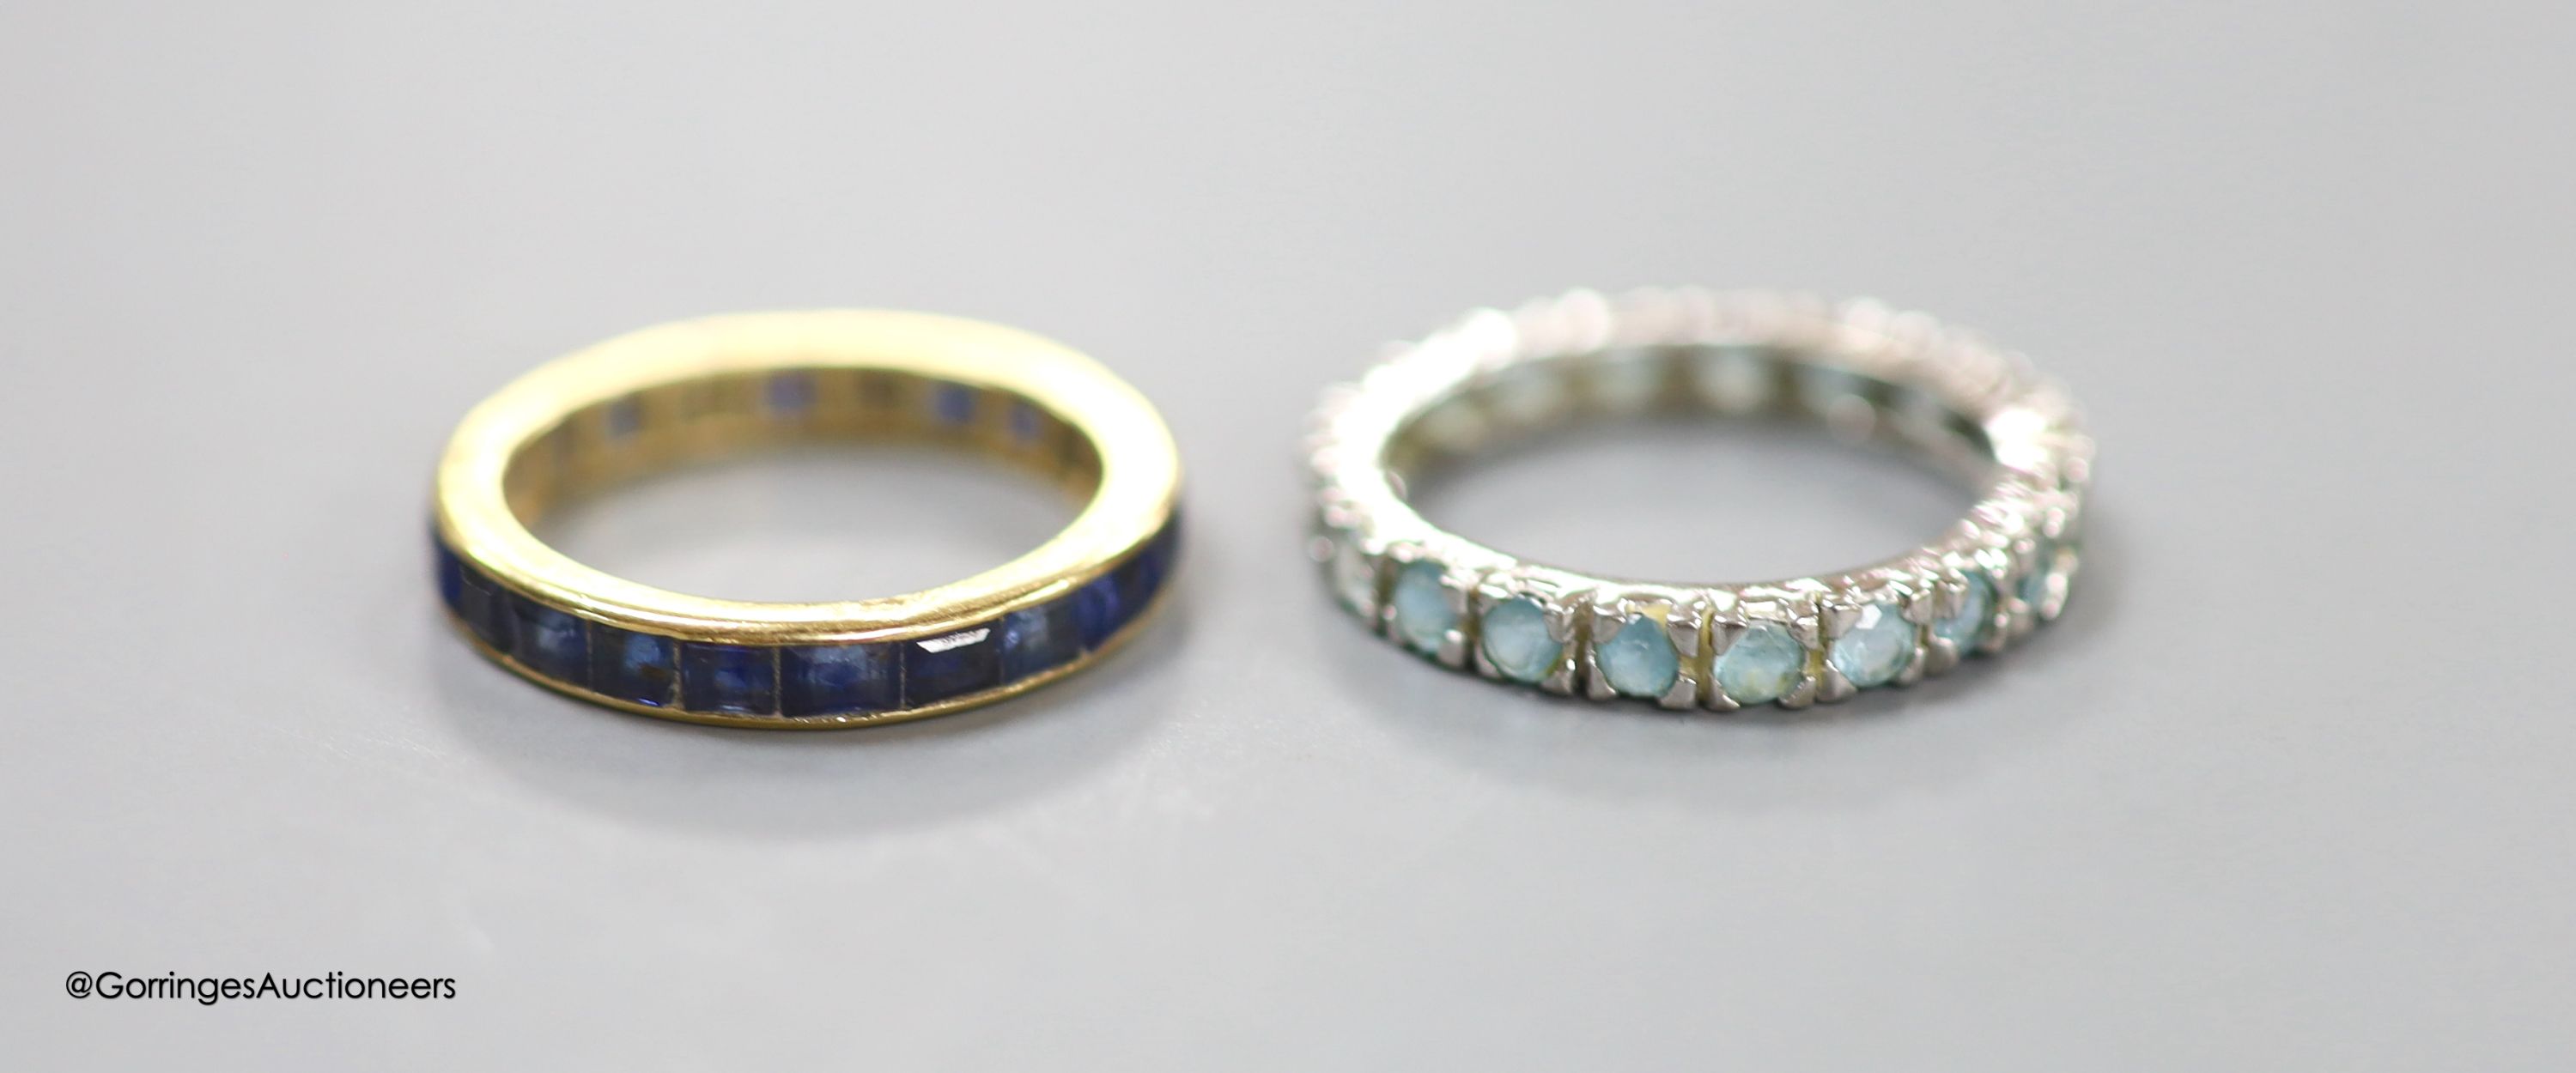 A yellow metal and sapphire set full eternity ring, size M, gross weight 2.8 grams and a white metal and blue gem set full eternity ring, size N/O, gross 2.4 grams.